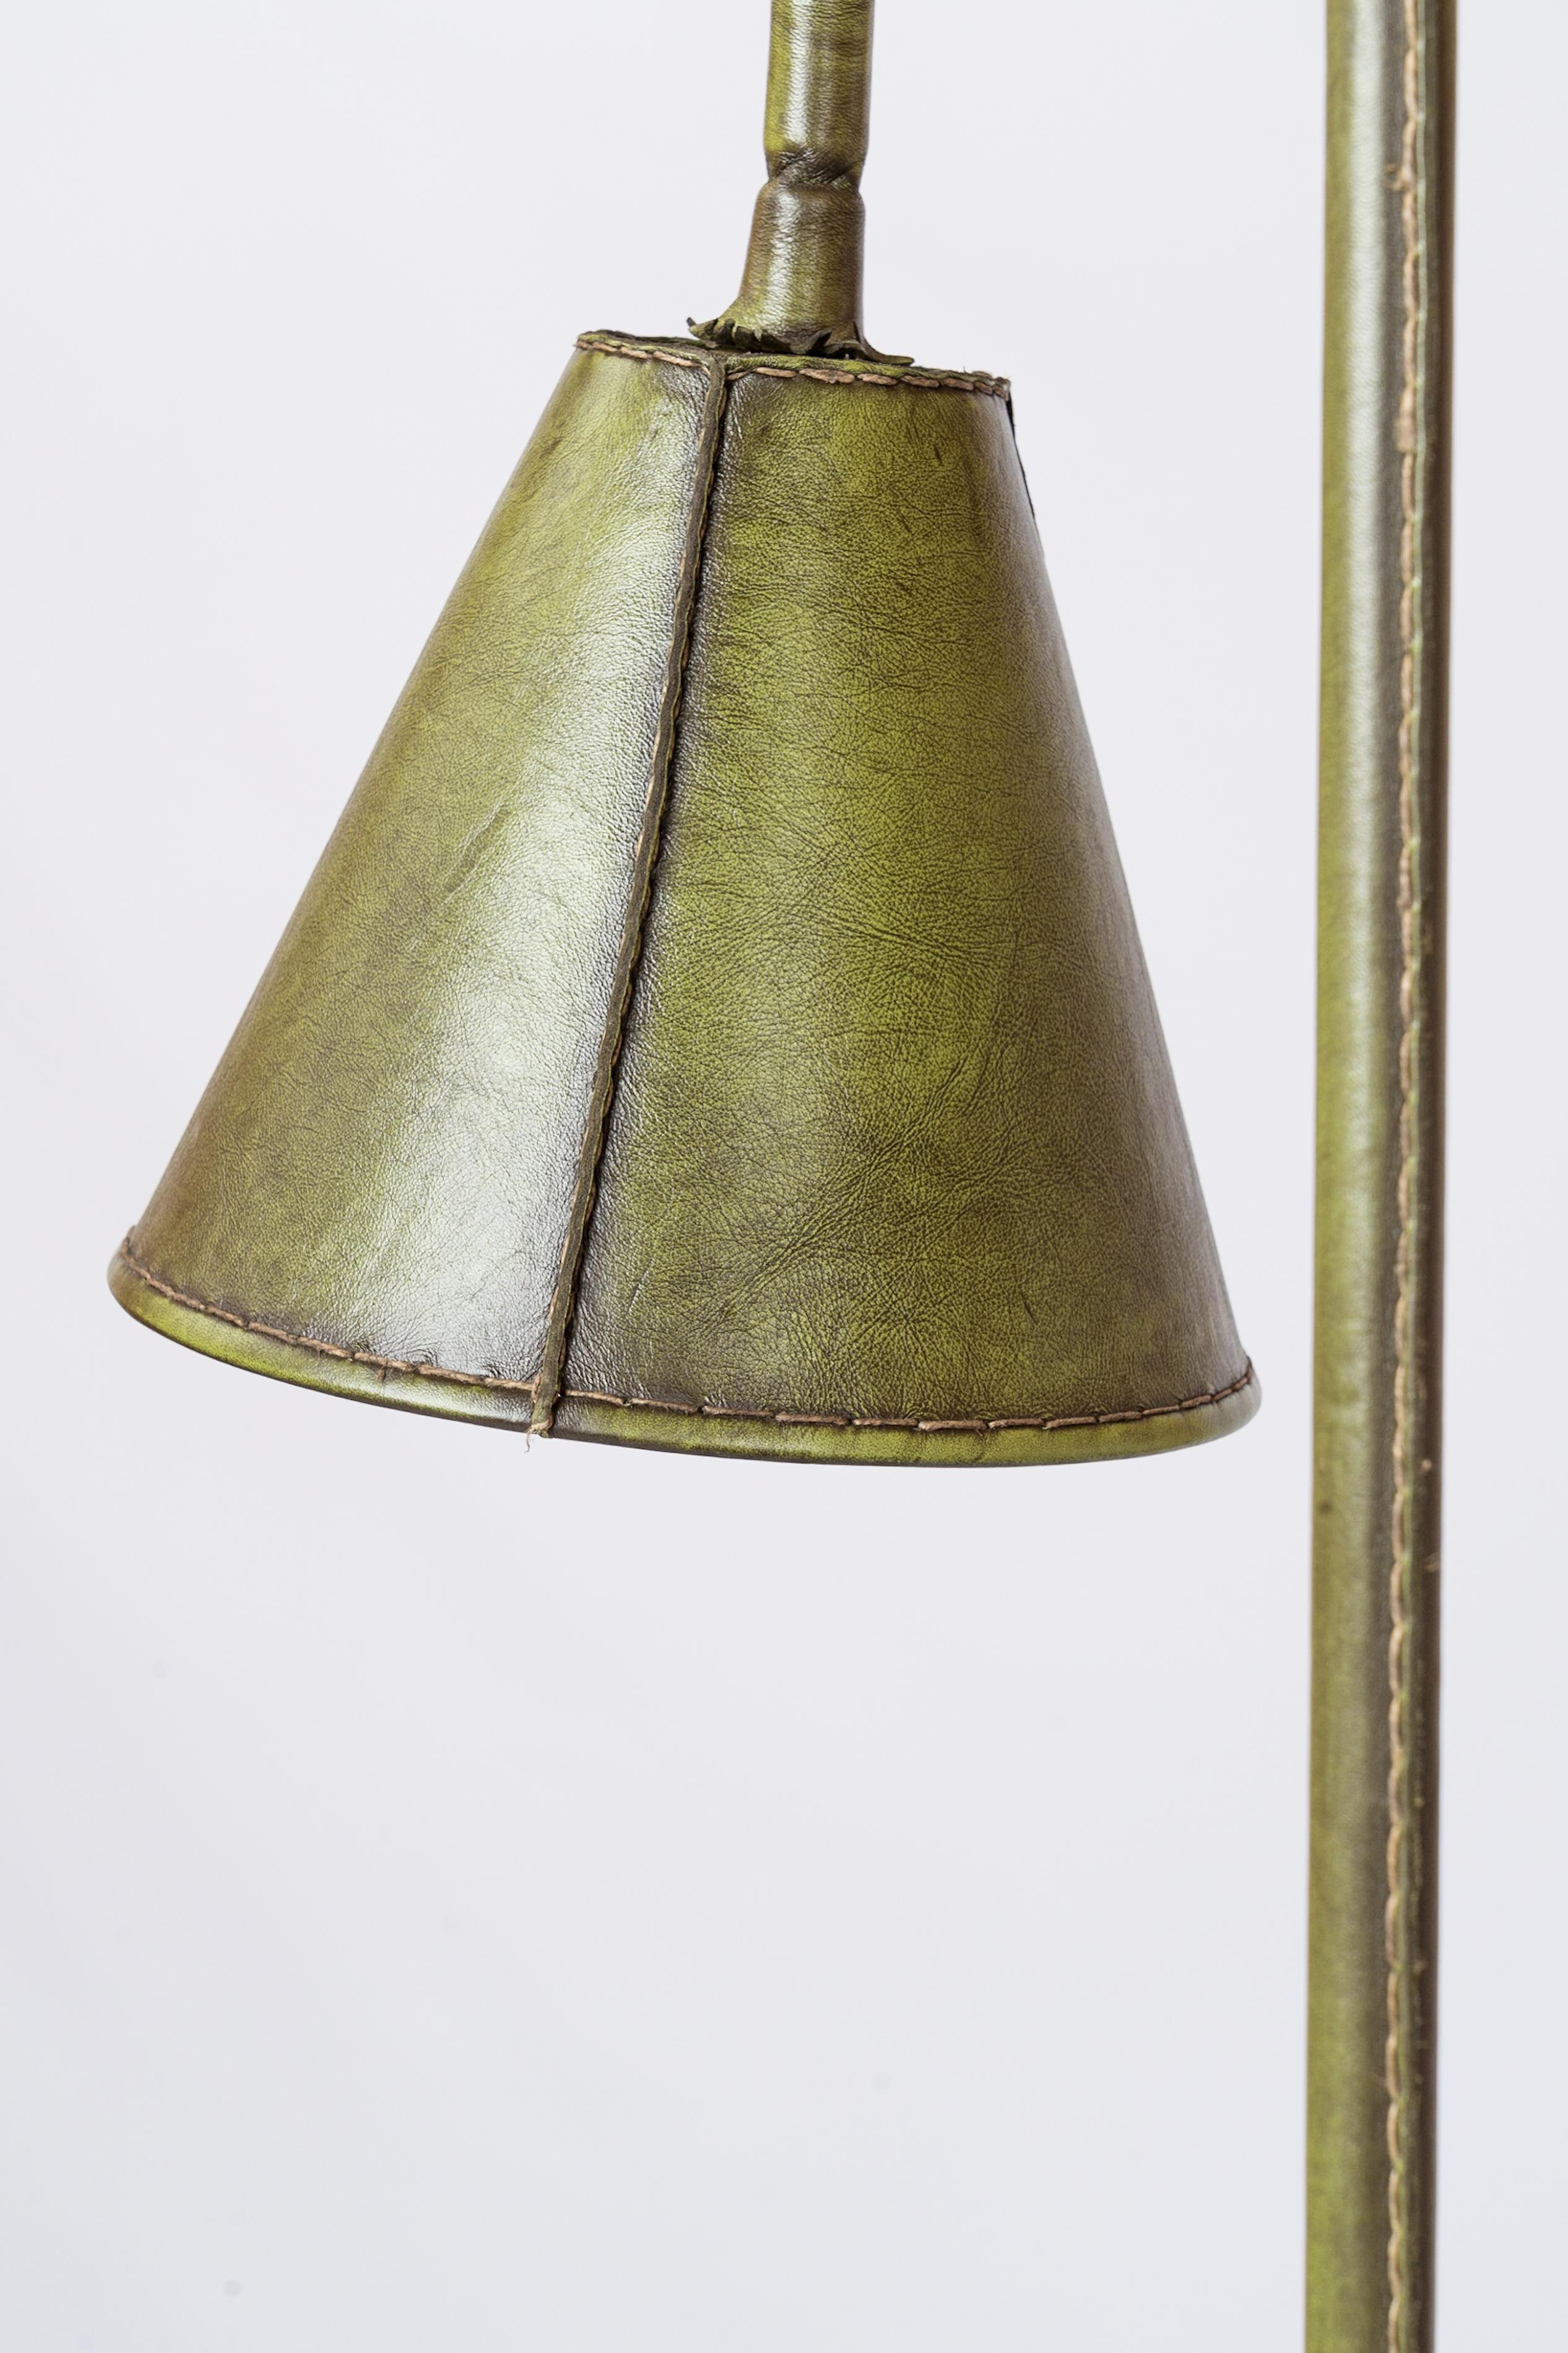 Dual Cones Leather Floor Lamp by Valenti - Spain 1960's For Sale 1